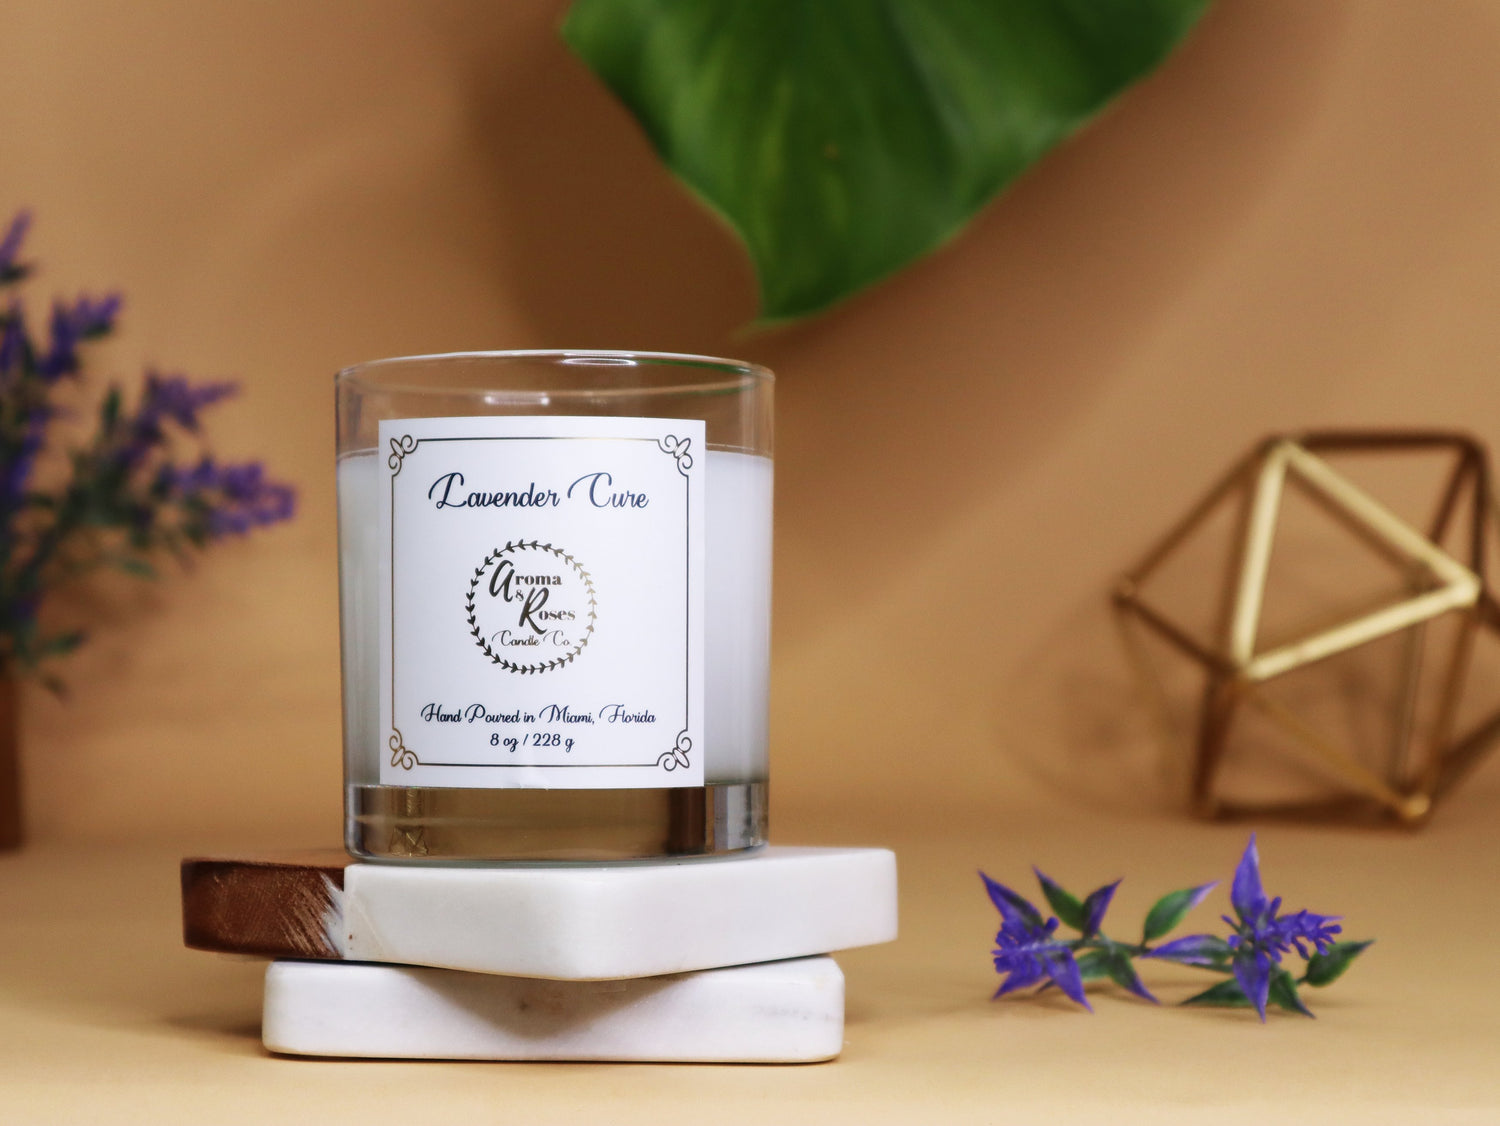 Lavender Cure Candle - aromaandrosescandle